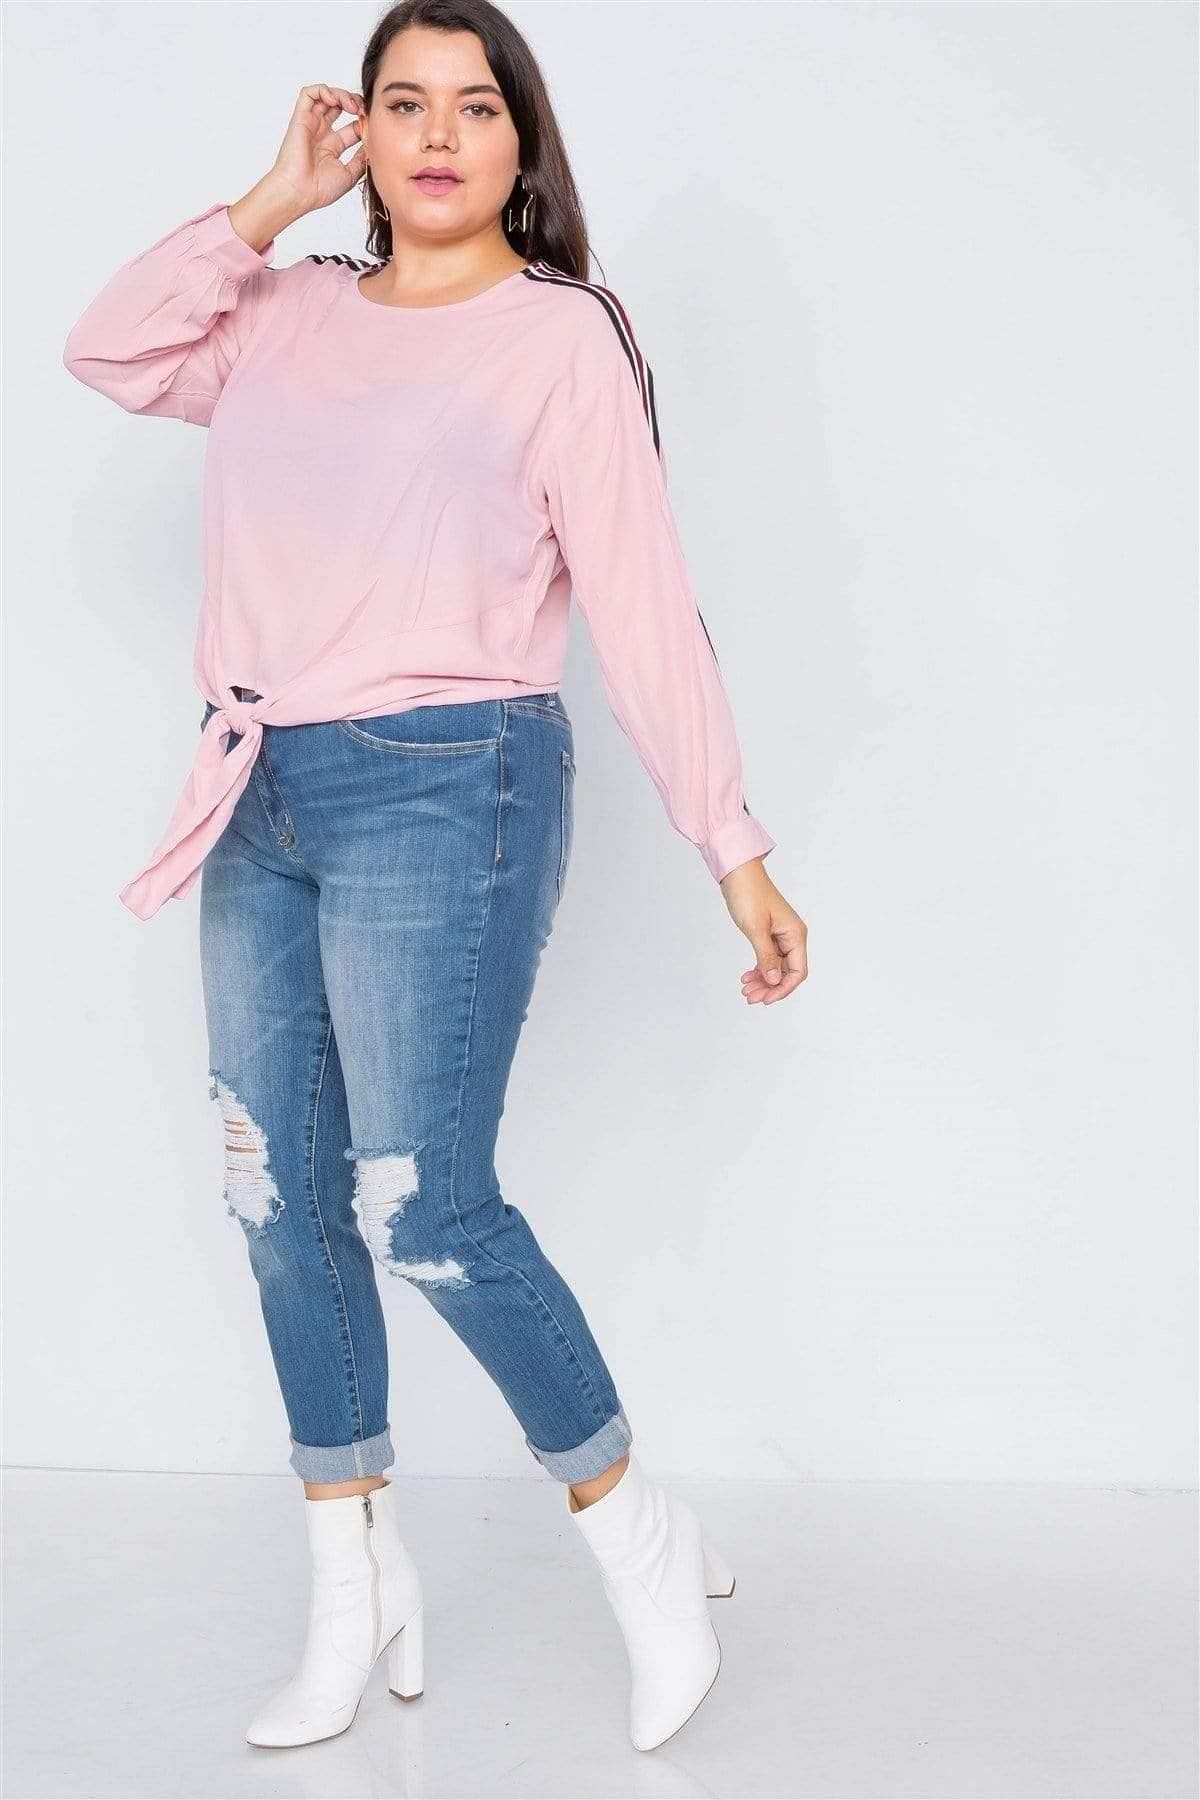 Pink Plus Size Long Sleeve Stripe Top - Shopping Therapy 3XL top